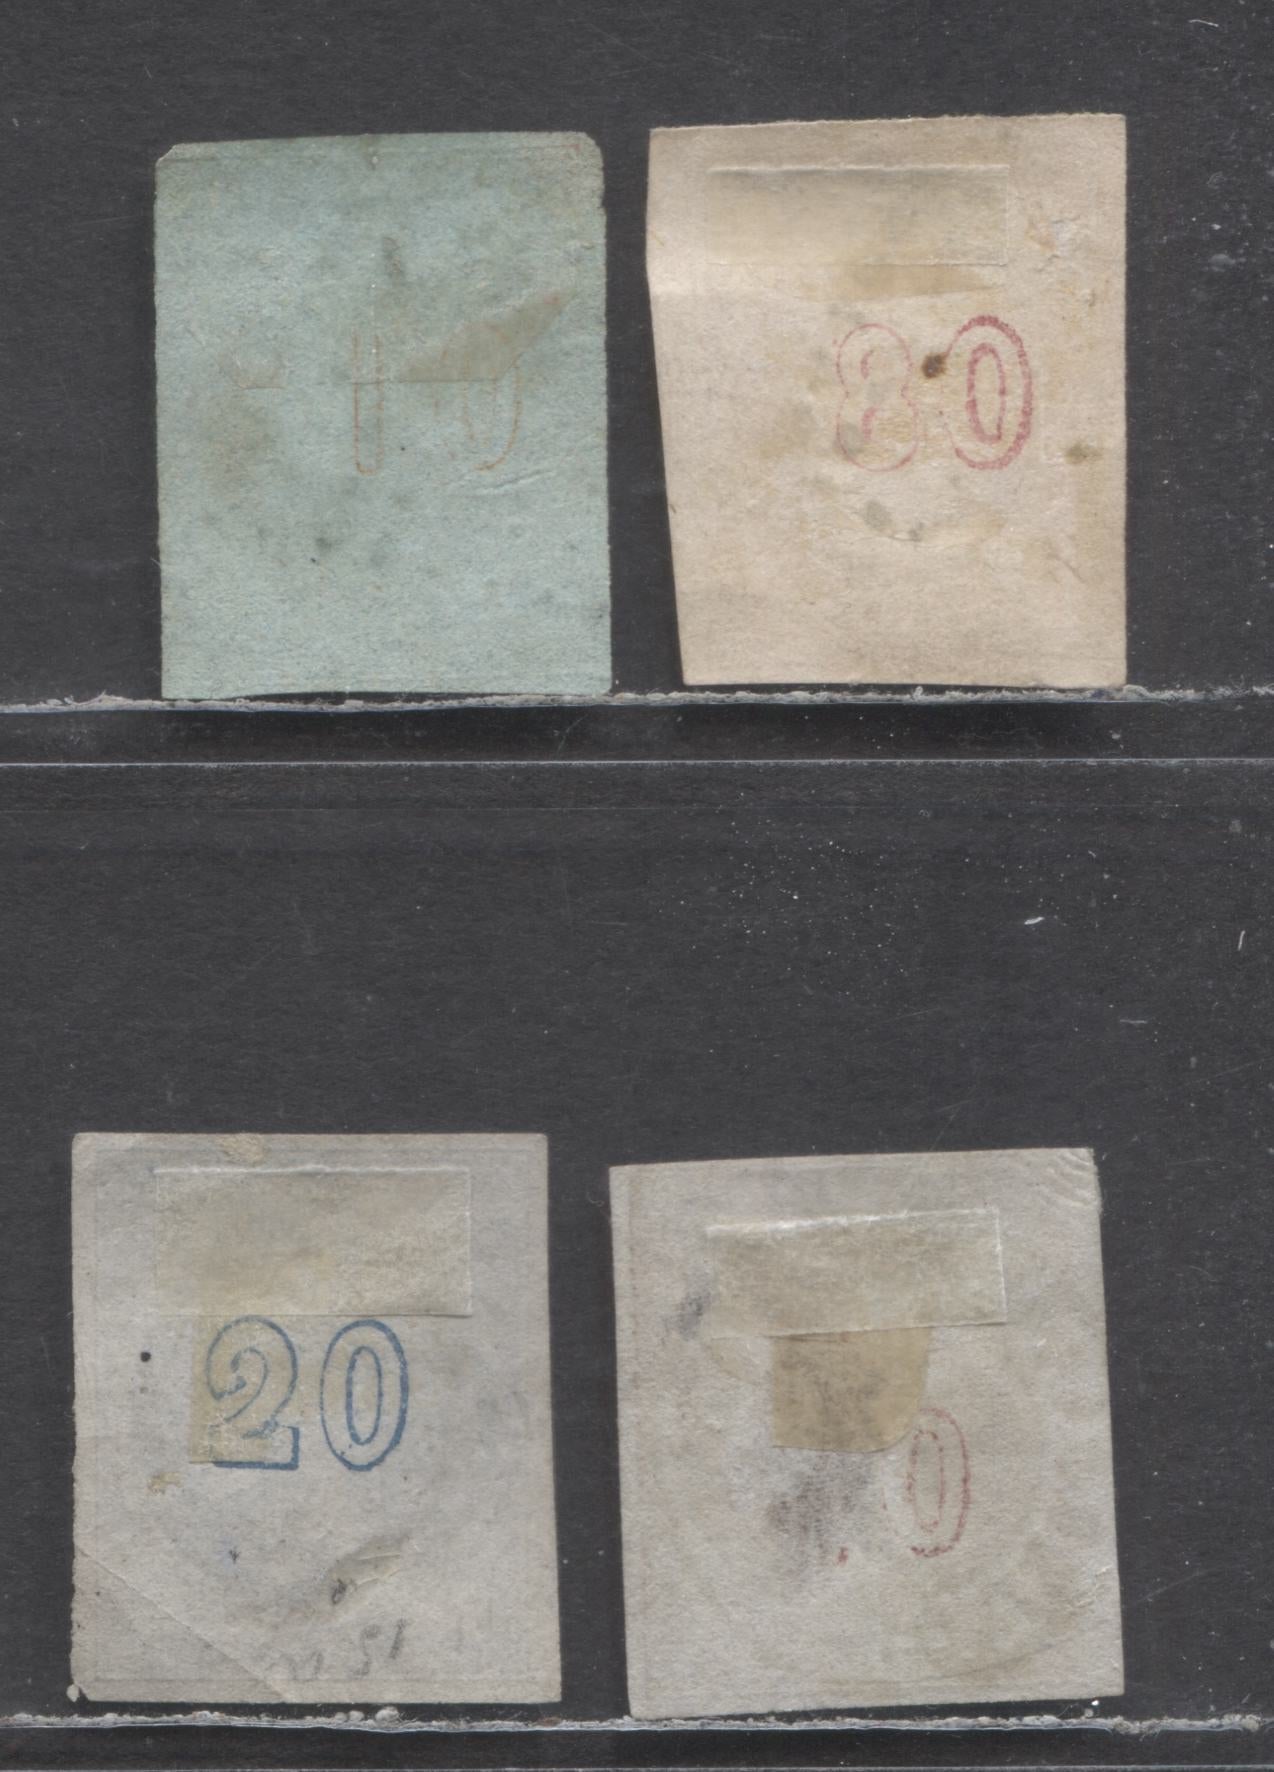 Lot 73 Greece SC#21b,27,22,19 1862-1868 Hermes Heads Issue, Athen's Prints And Cleaned Plates Printings All With Faults, 4 G-G Used Singles, Click on Listing to See ALL Pictures, Estimated Value $15 USD